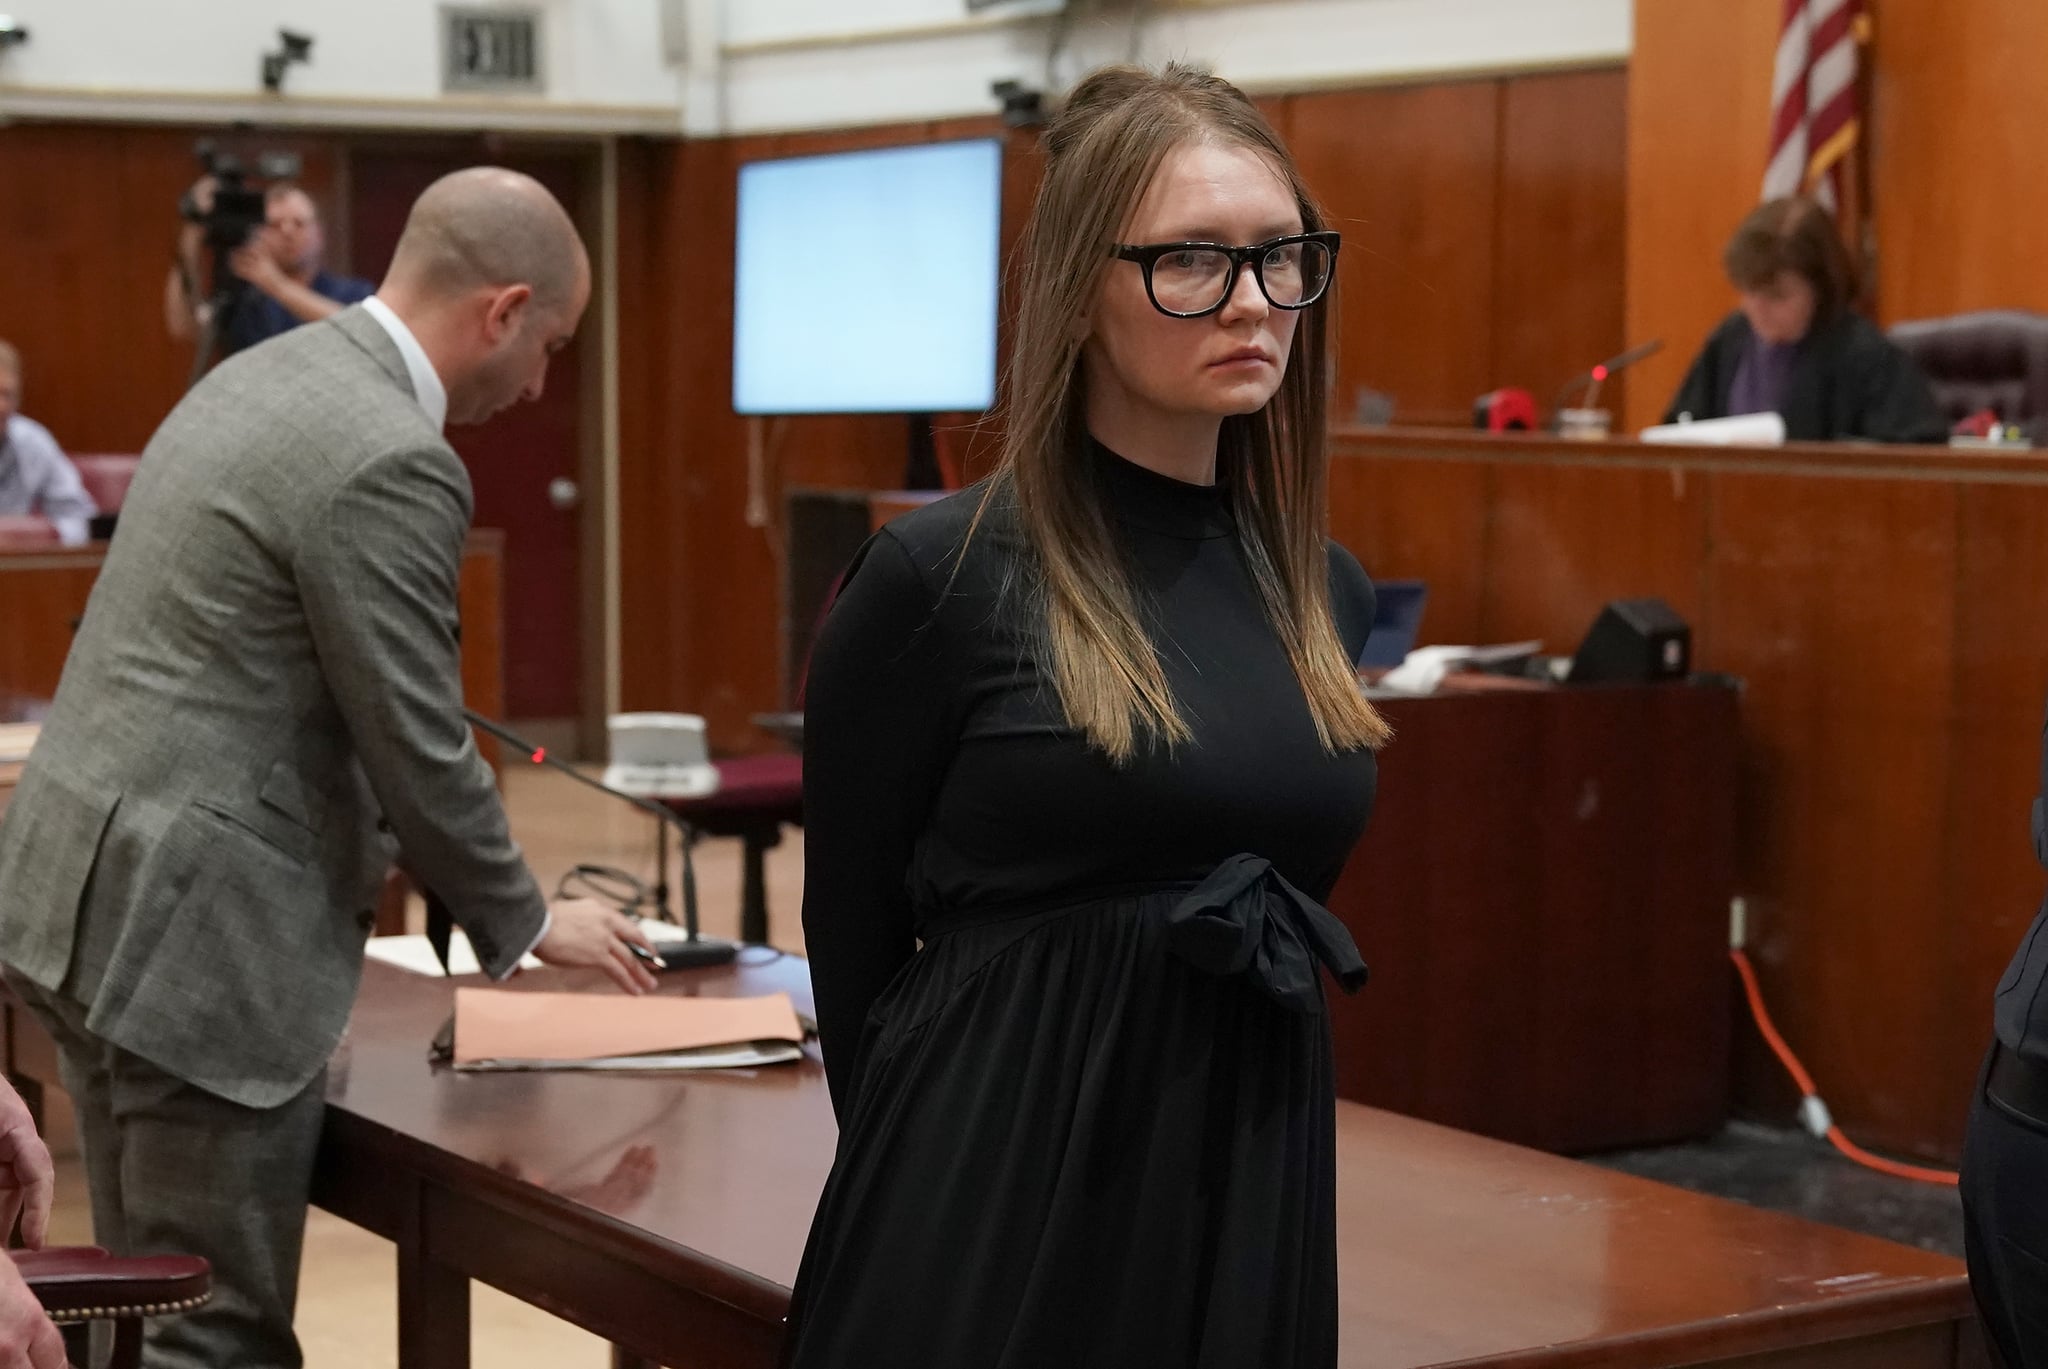 Fake German heiress Anna Sorokin is led away after being sentenced in Manhattan Supreme Court May 9, 2019 following her conviction last month on multiple counts of grand larceny and theft of services. (Photo by TIMOTHY A. CLARY / AFP) (Photo credit should read TIMOTHY A. CLARY/AFP via Getty Images)